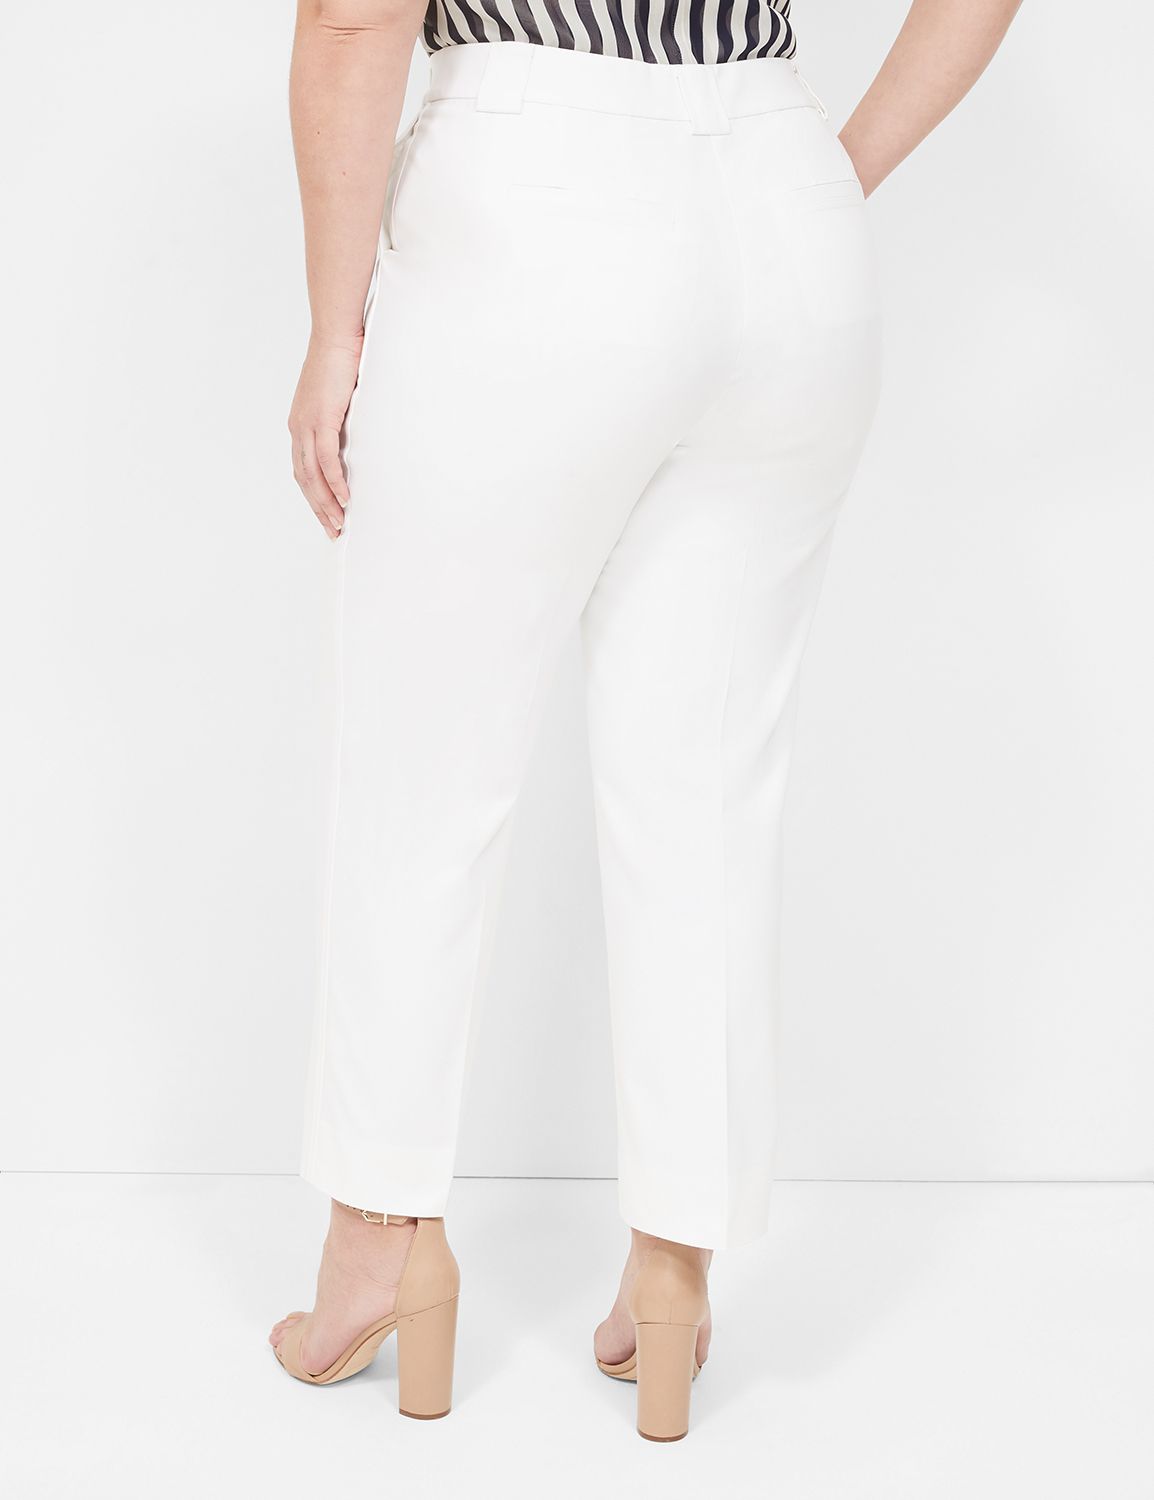 These perfect white ankle pants will carry your wardrobe to new